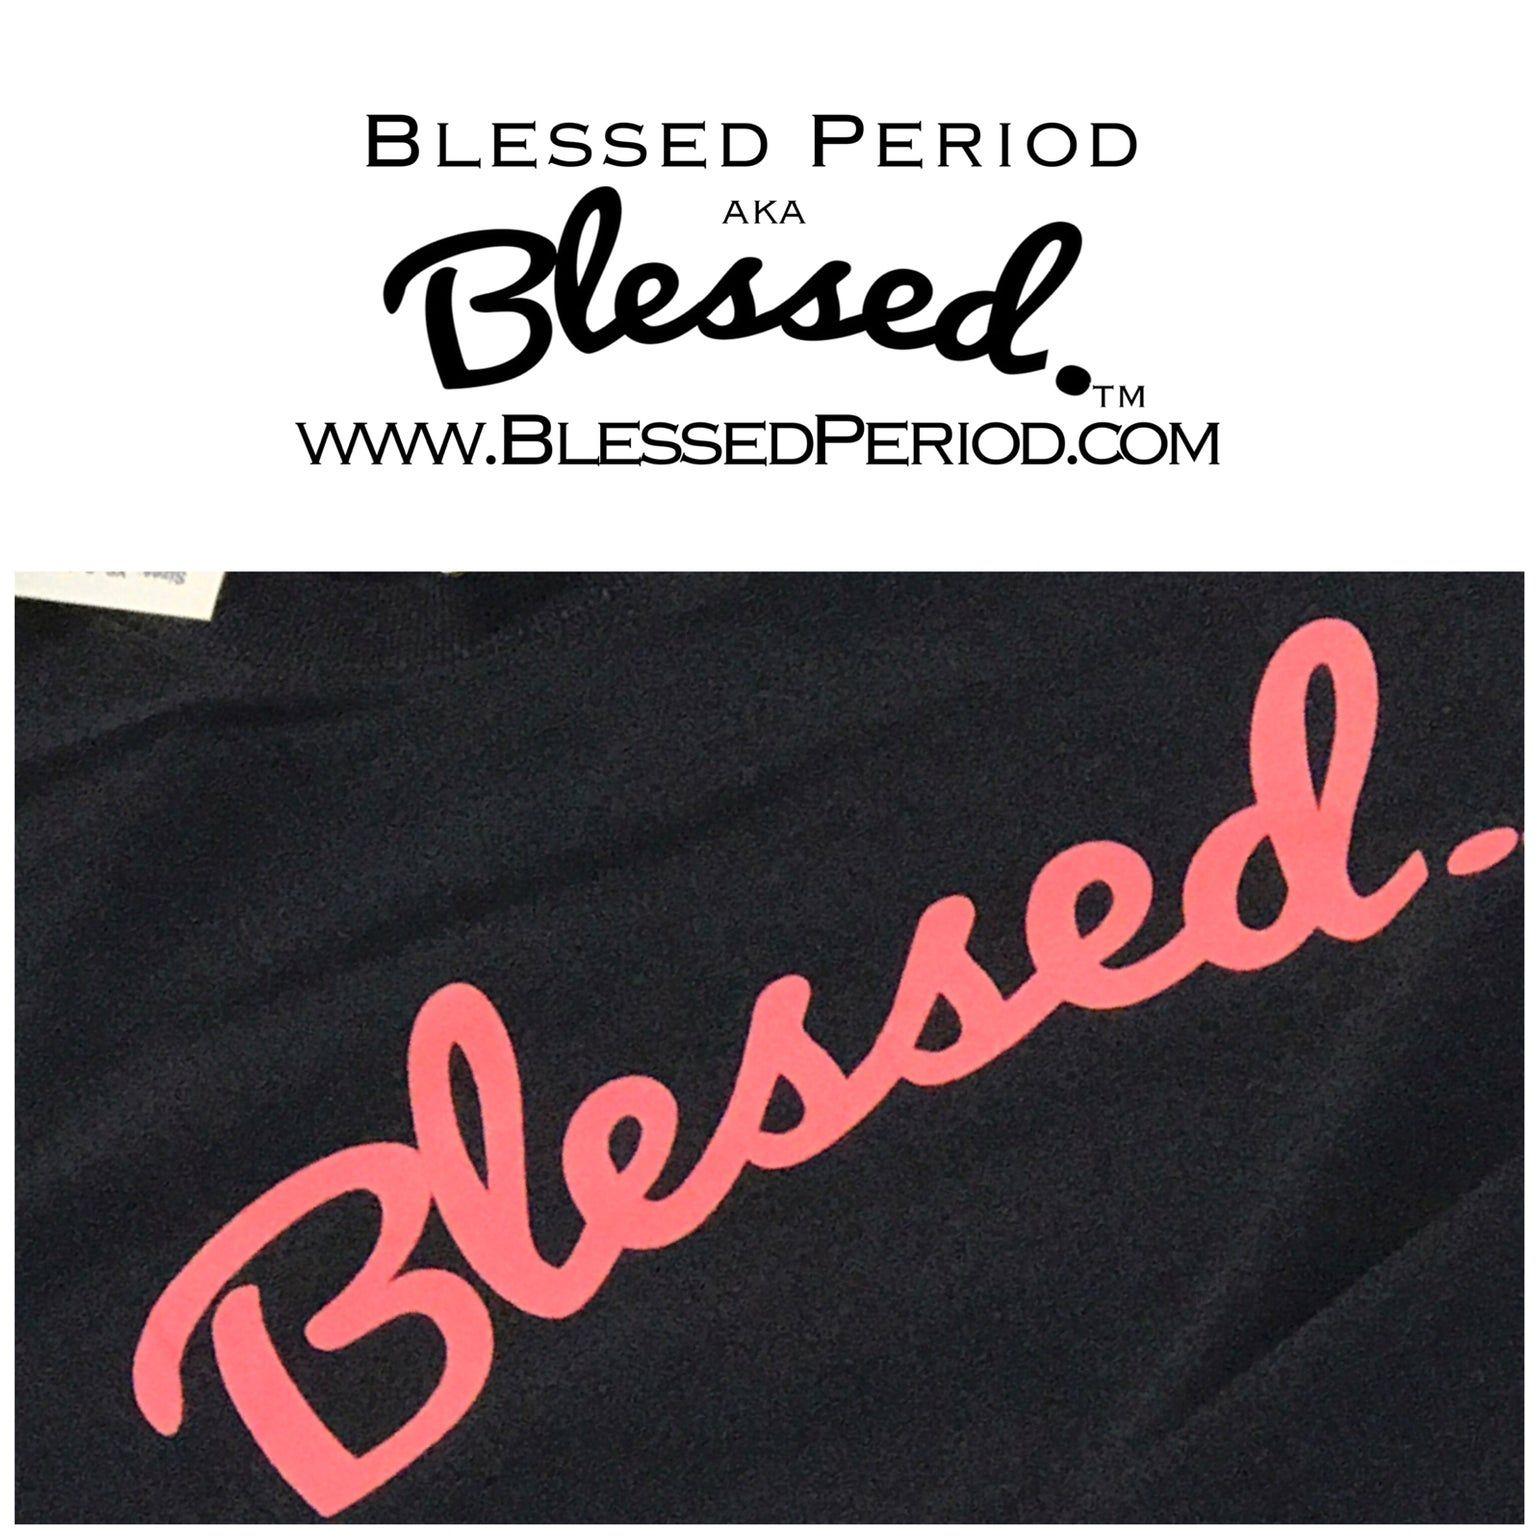 Blessed Logo - Pink Blessed Period aka “Blessed.” Logo T